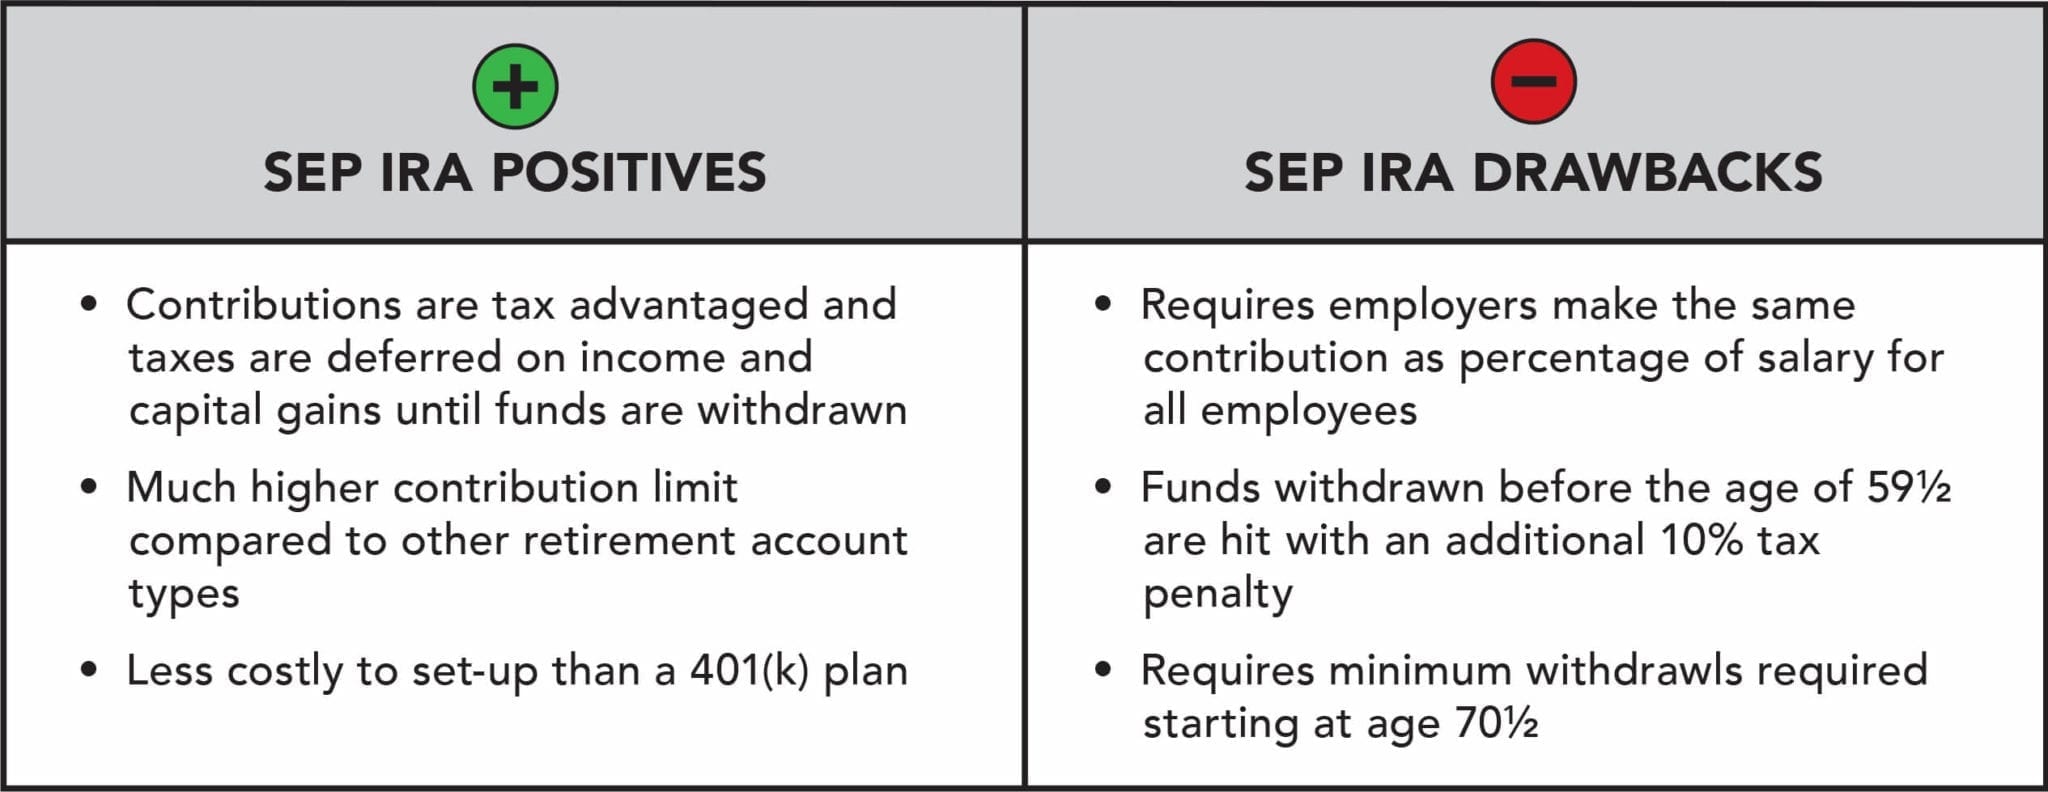 can an employee opt out of a sep ira